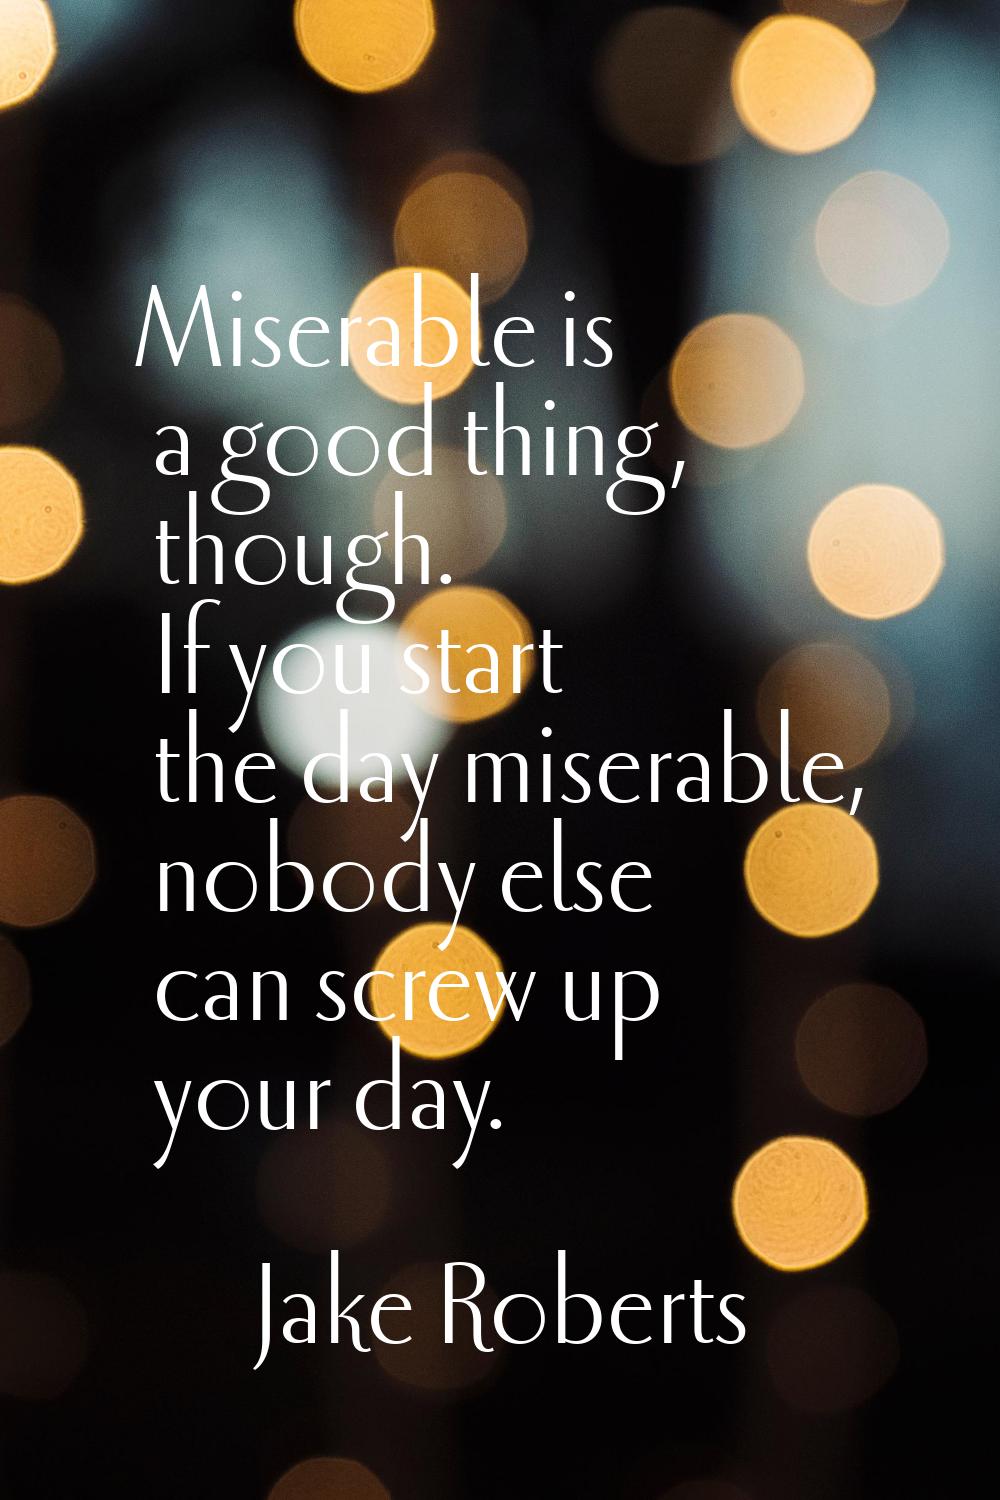 Miserable is a good thing, though. If you start the day miserable, nobody else can screw up your da